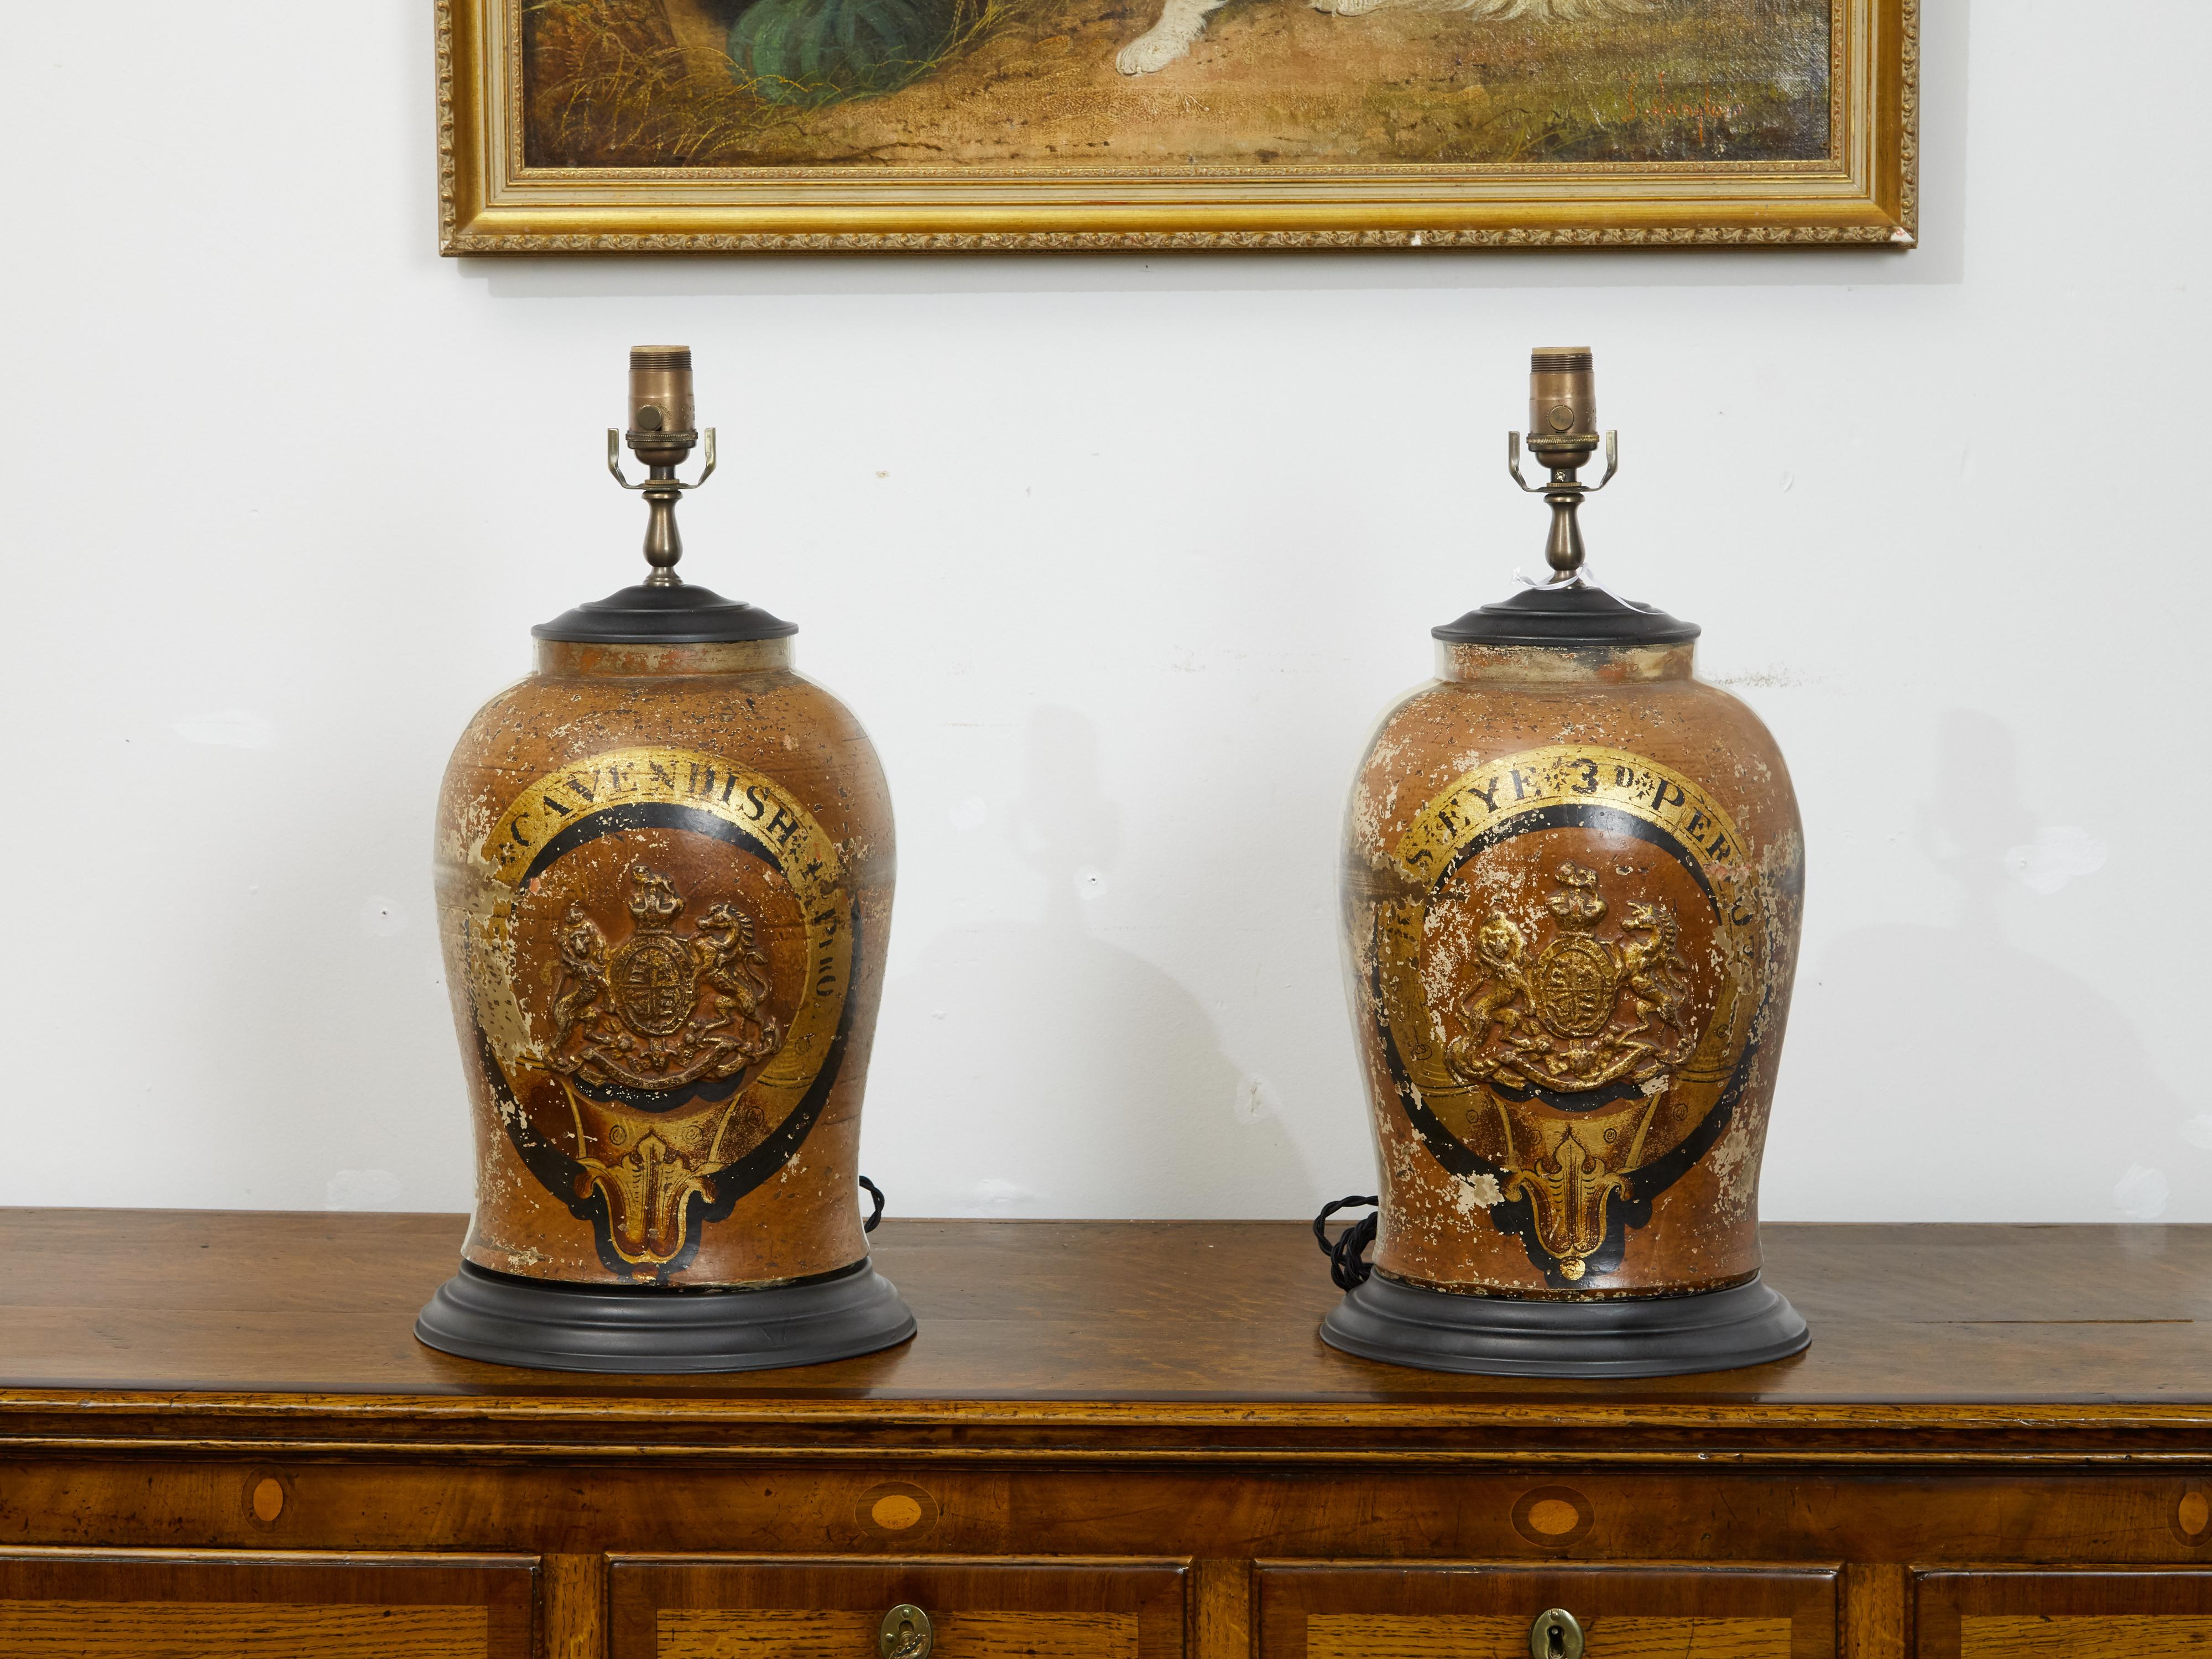 A pair of English stoneware from the late 19th century, with coat of arms made into table lamps. Created in England during the last quarter of the 19th century, this pair of English stoneware has been converted into table lamps. They are adorned